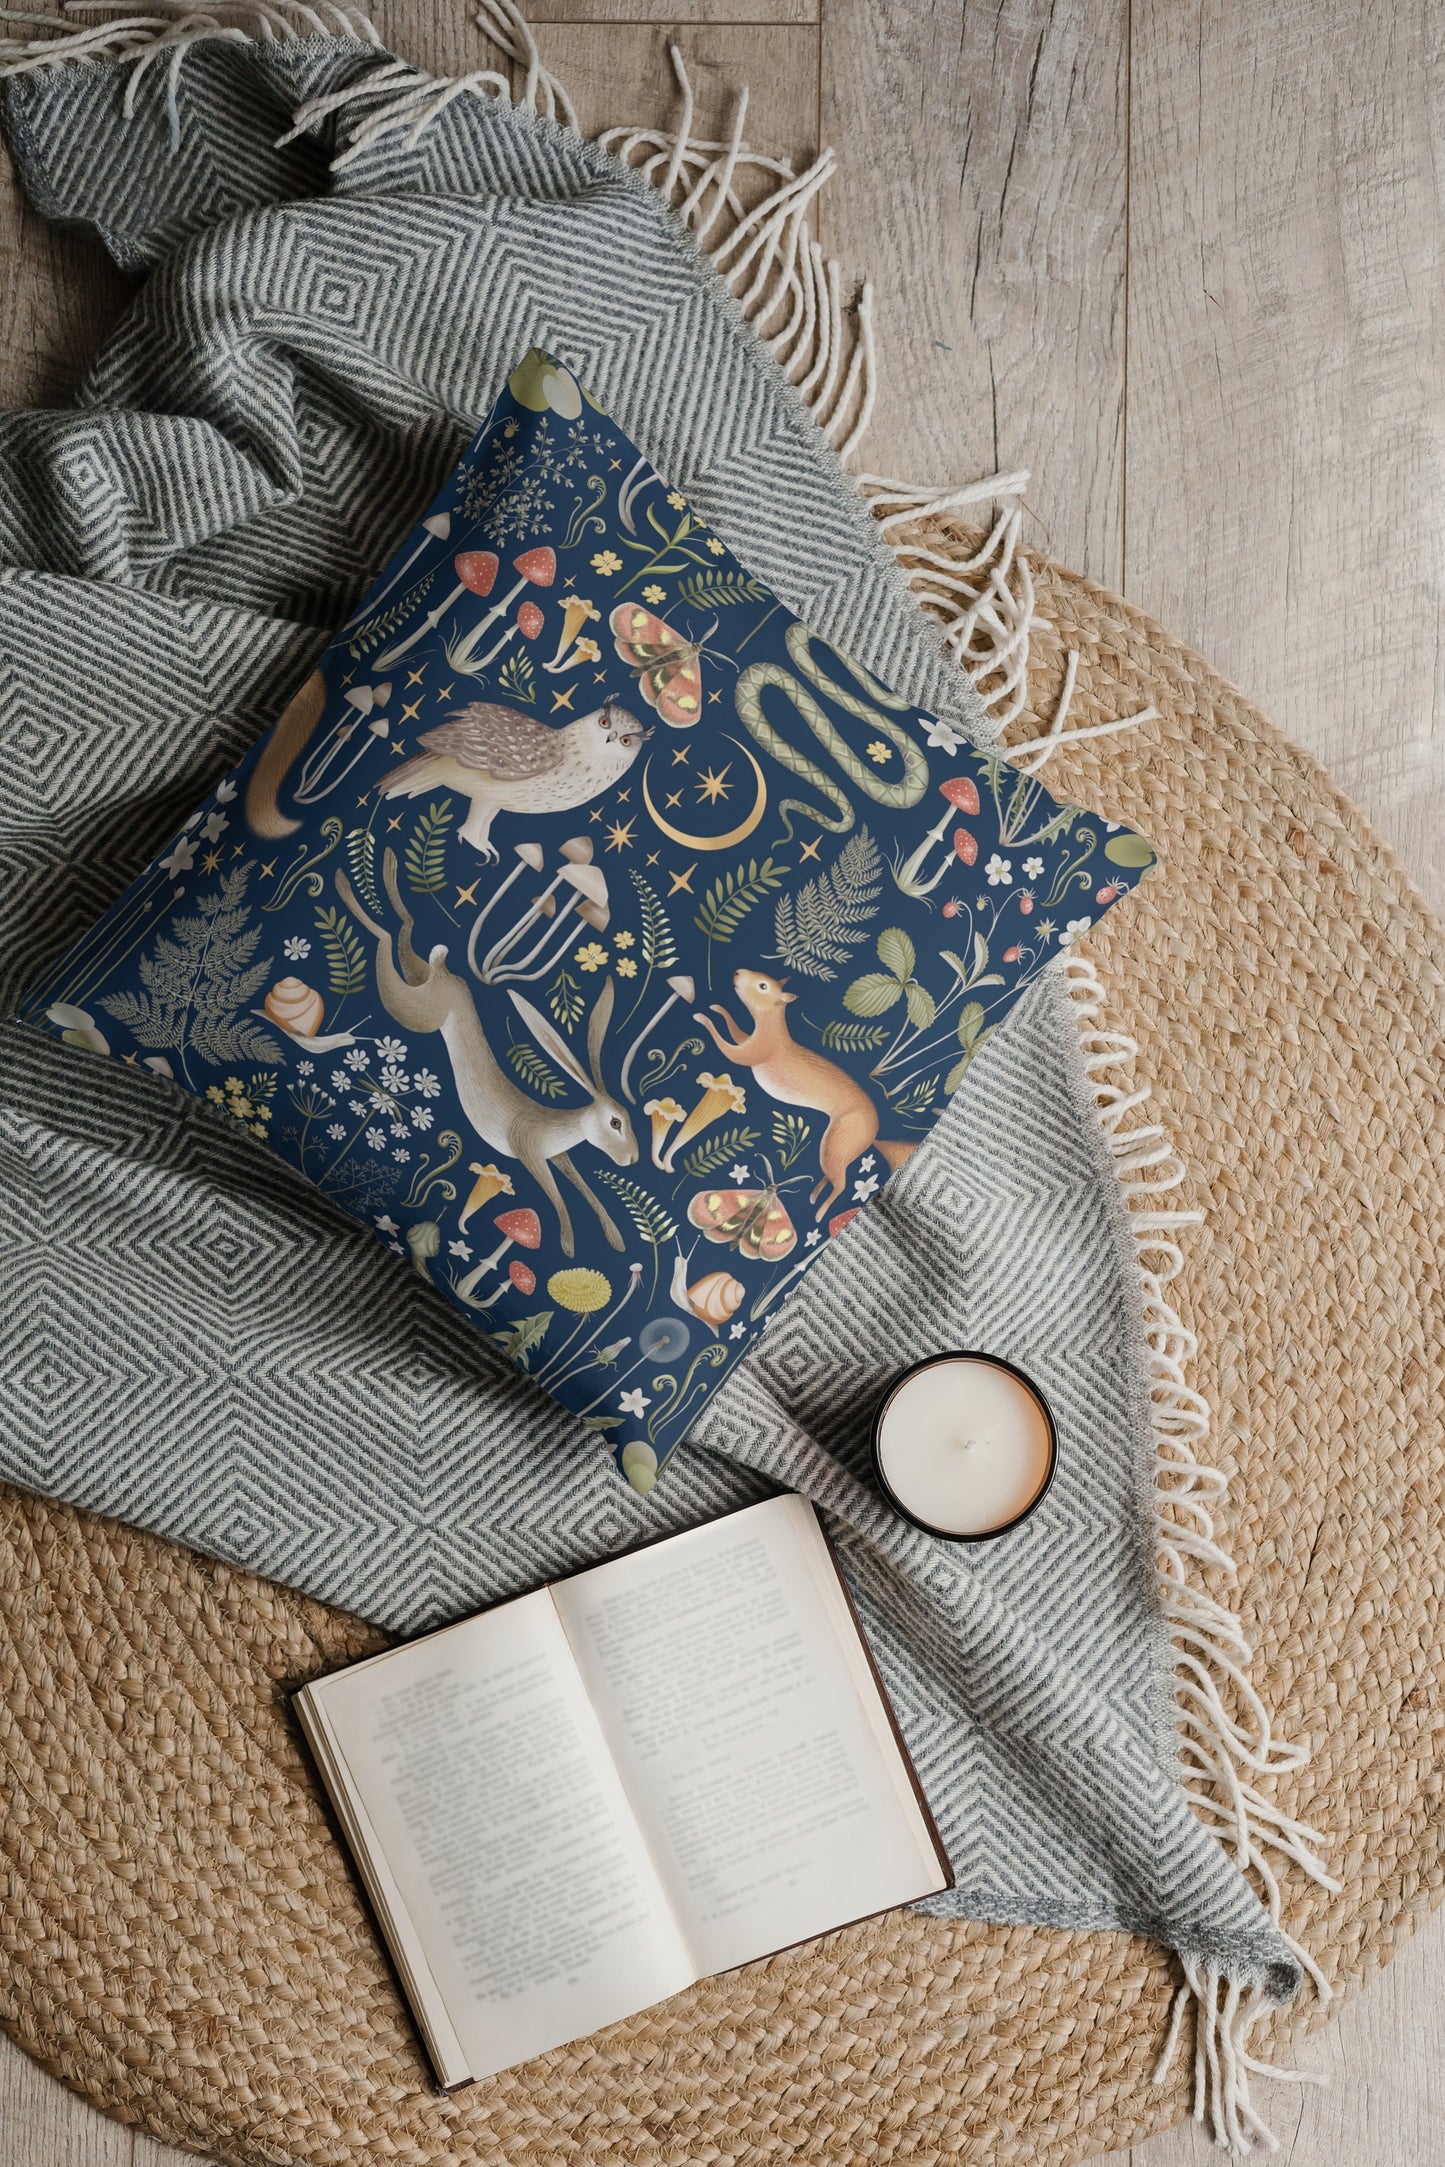 Enchanted Forest Outdoor Pillows Navy Blue